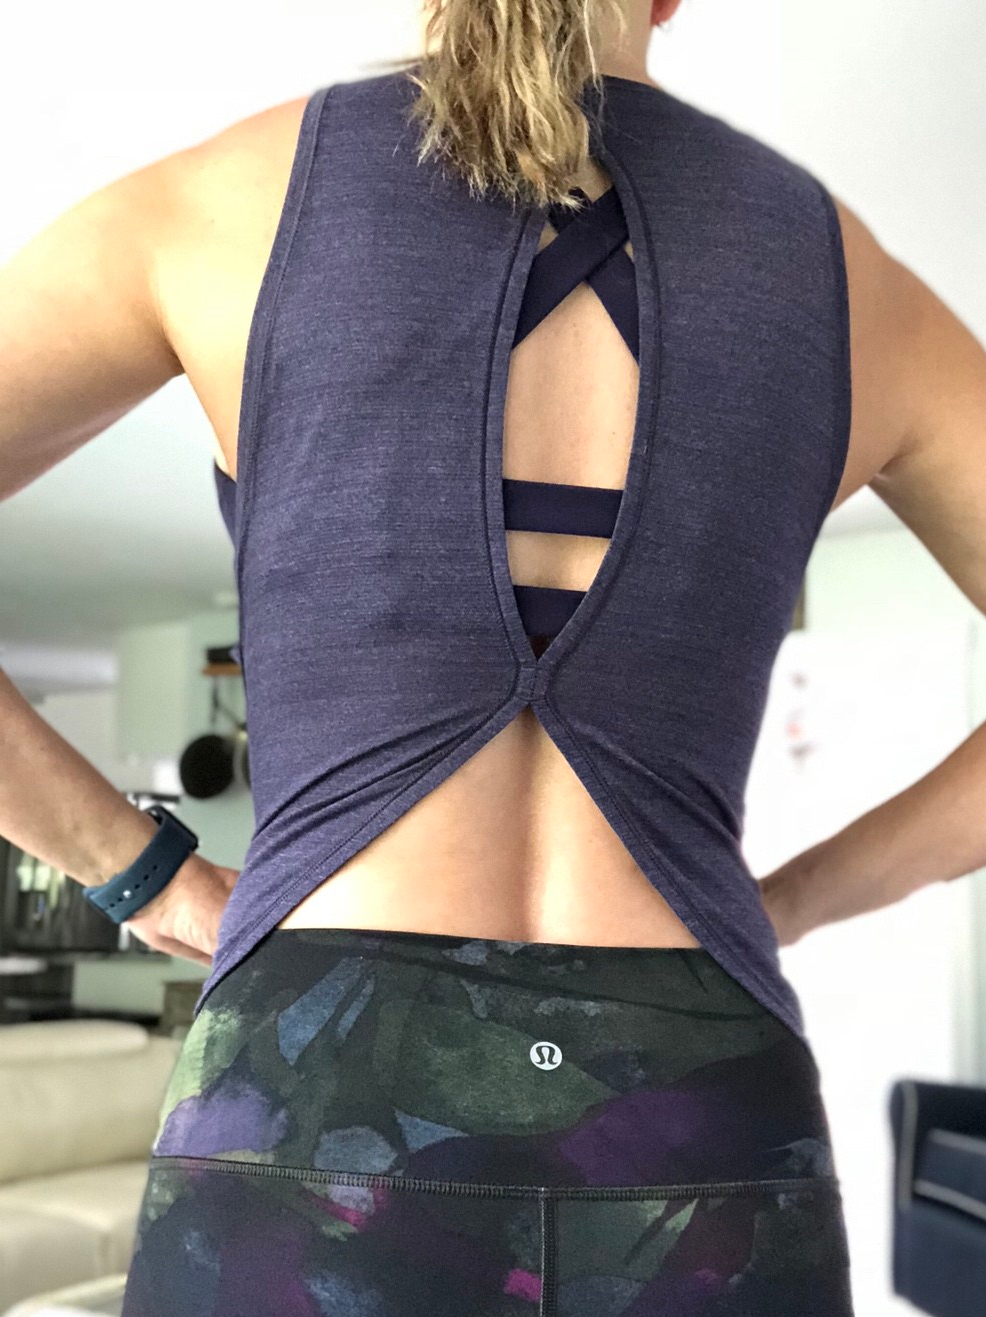 Lululemon Made Me Feel Fat – And Then They Changed My Mind – Geek Mamas